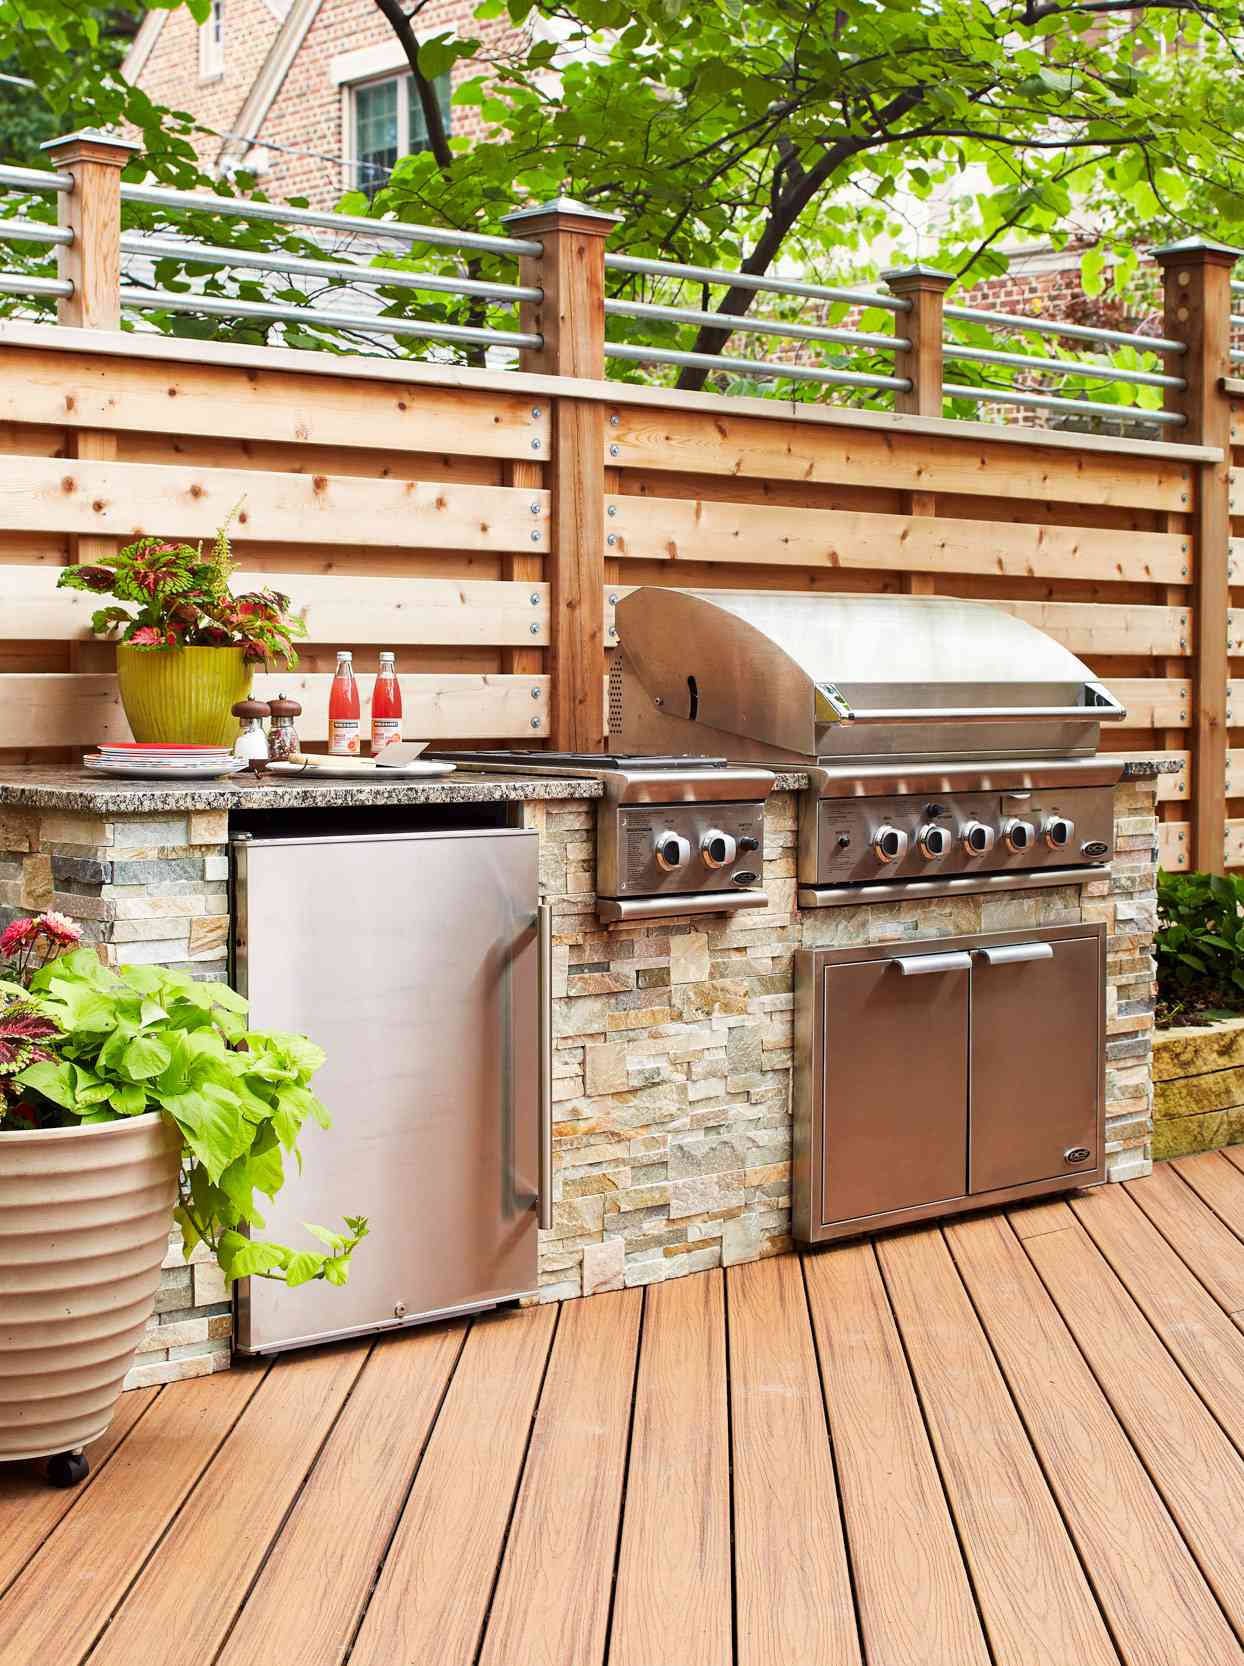 stone grill on wooden deck